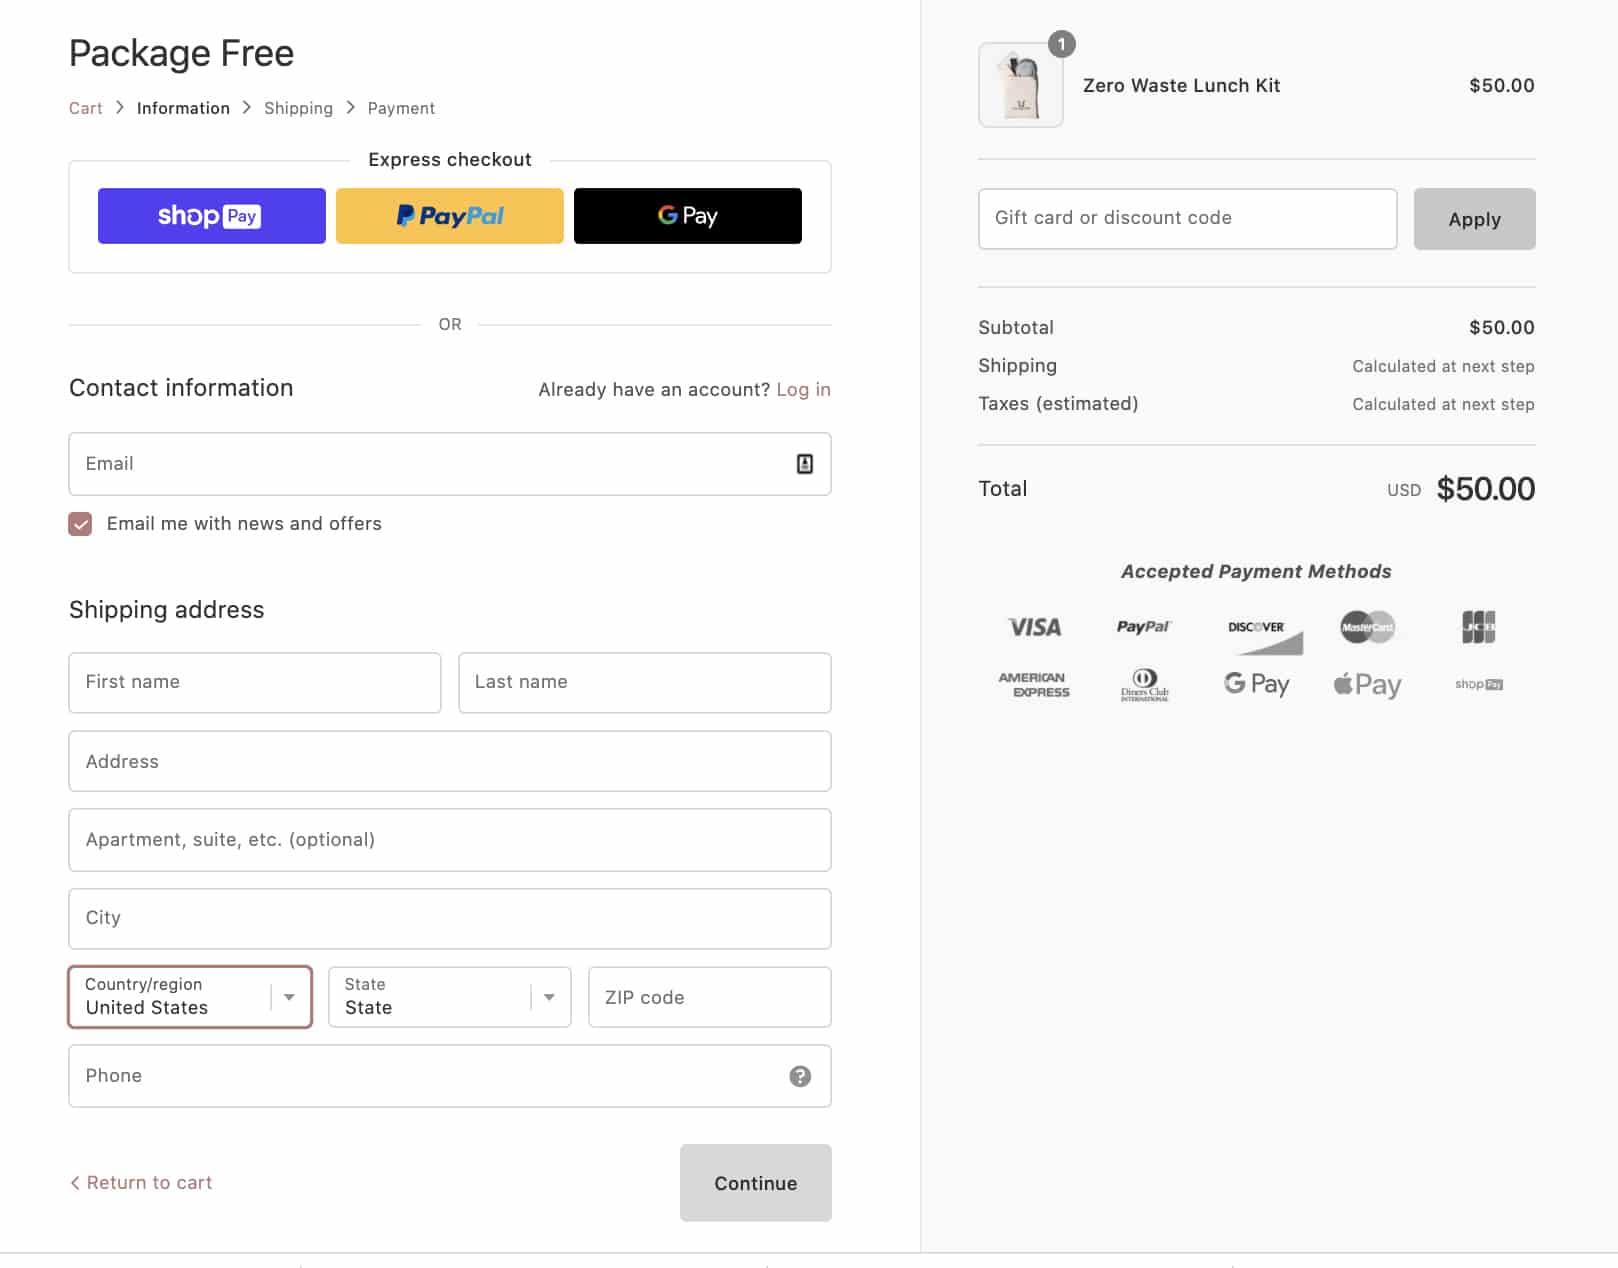 Package Free has a streamlined checkout page on its Shopify store.